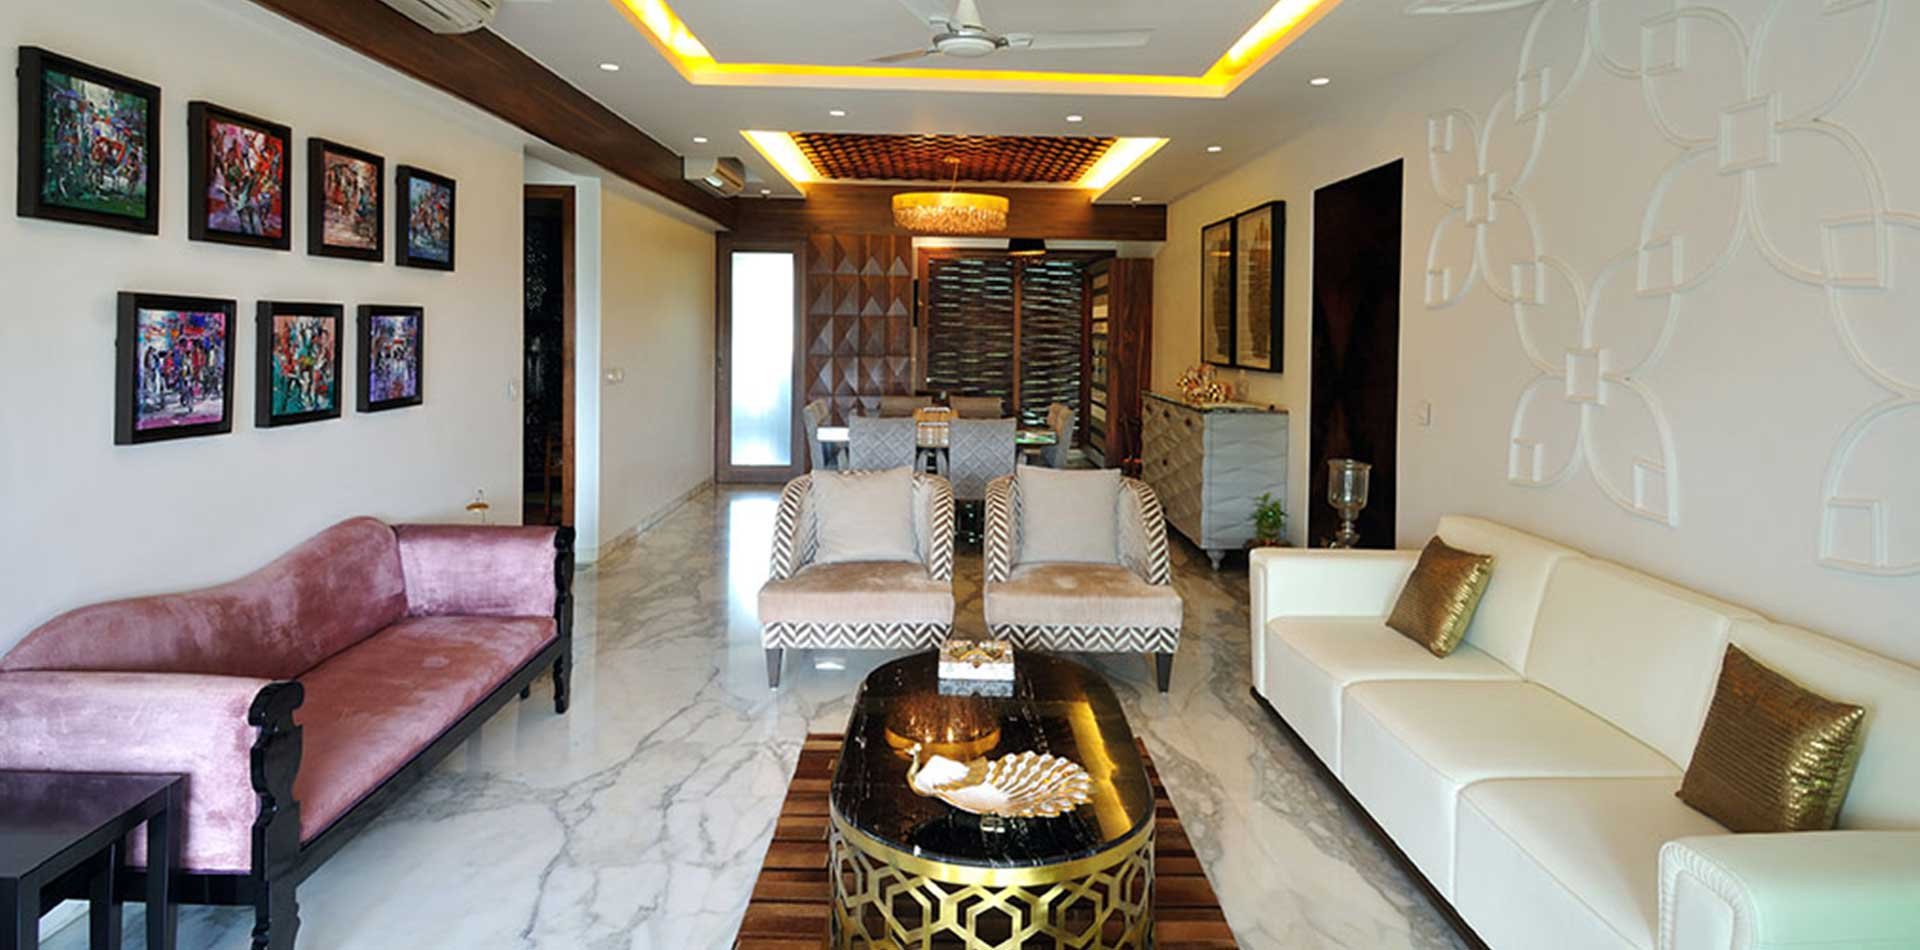 10 Examples of Modern indian interiors - RTF | Rethinking The Future